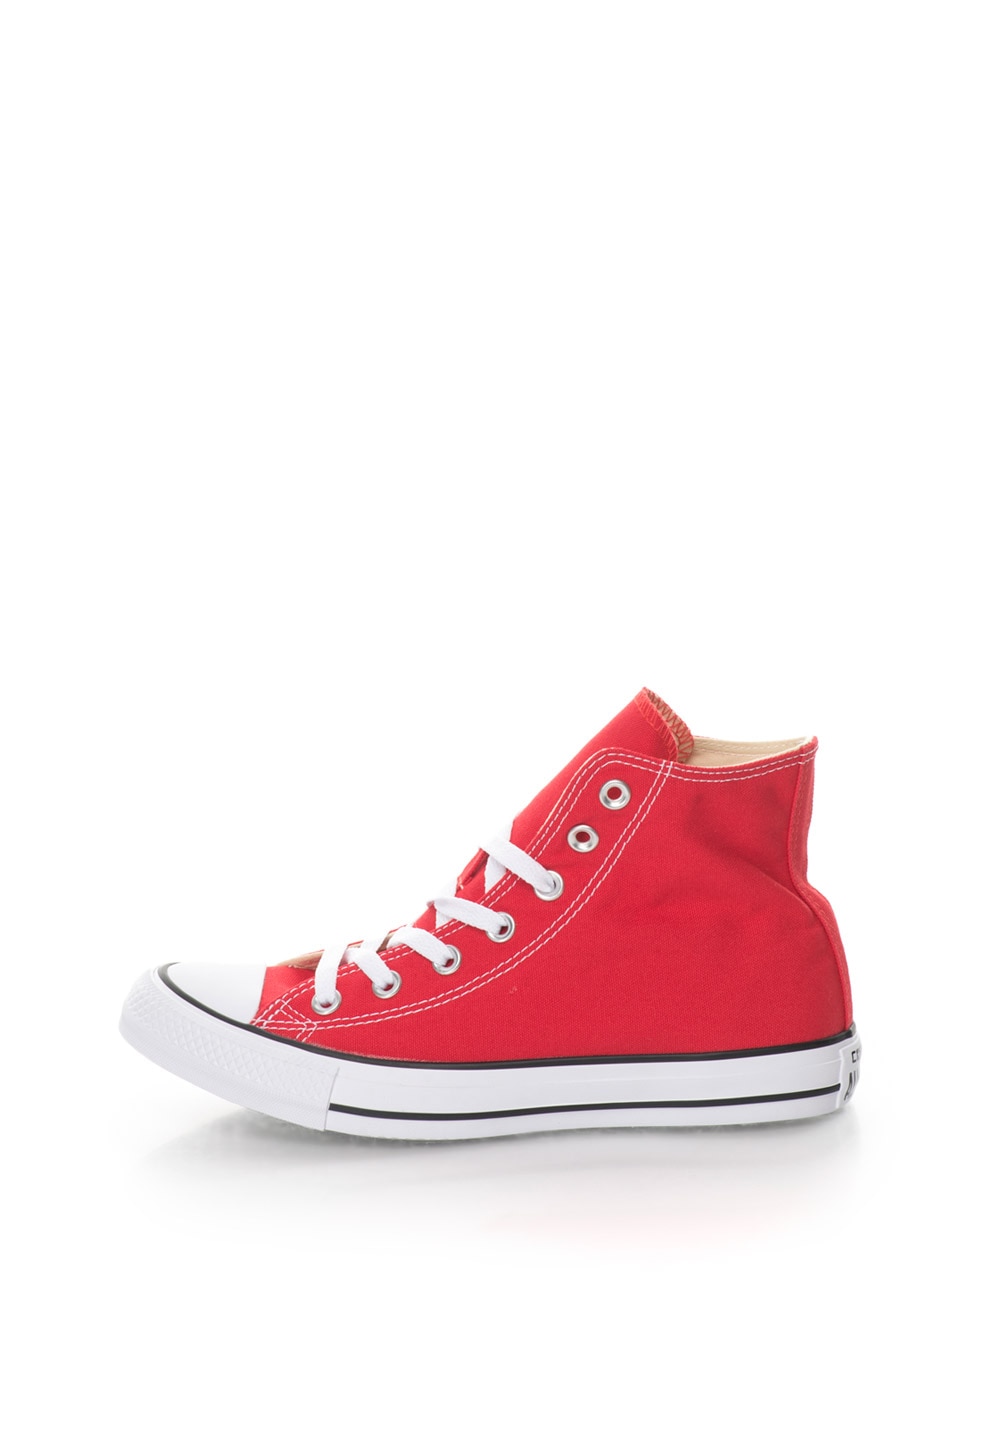 conservative Looting Eat dinner Converse, Tenisi inalti unisex Chuck Taylor All Star, Rosu, 11.5 - eMAG.ro